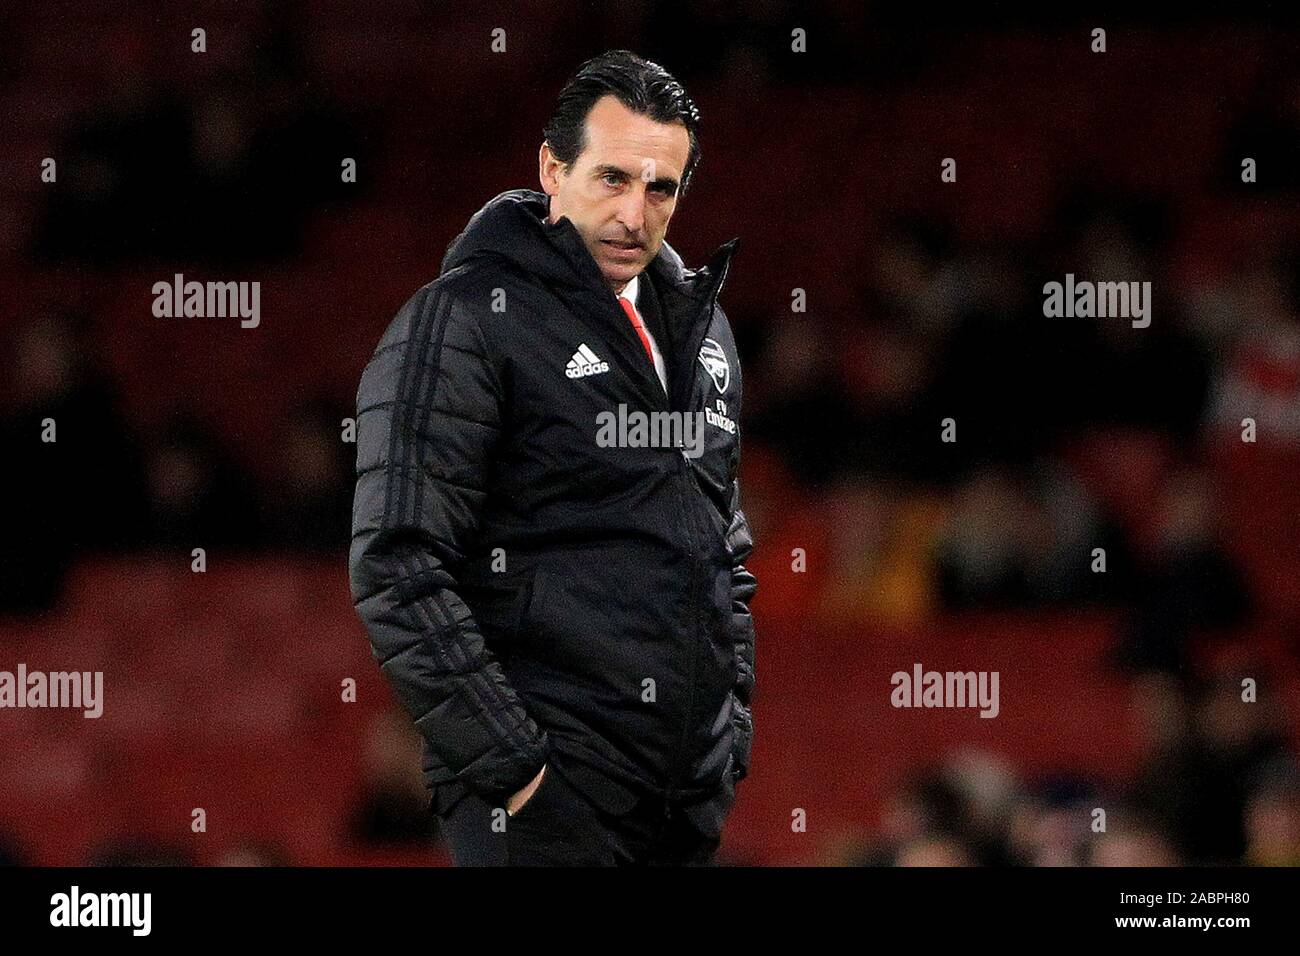 London, UK. 28th Nov, 2019. Arsenal Head Coach Unai Emery looks on from the  touchline wearing his black coat early in the game. UEFA Europa league  group F match, Arsenal v Eintracht